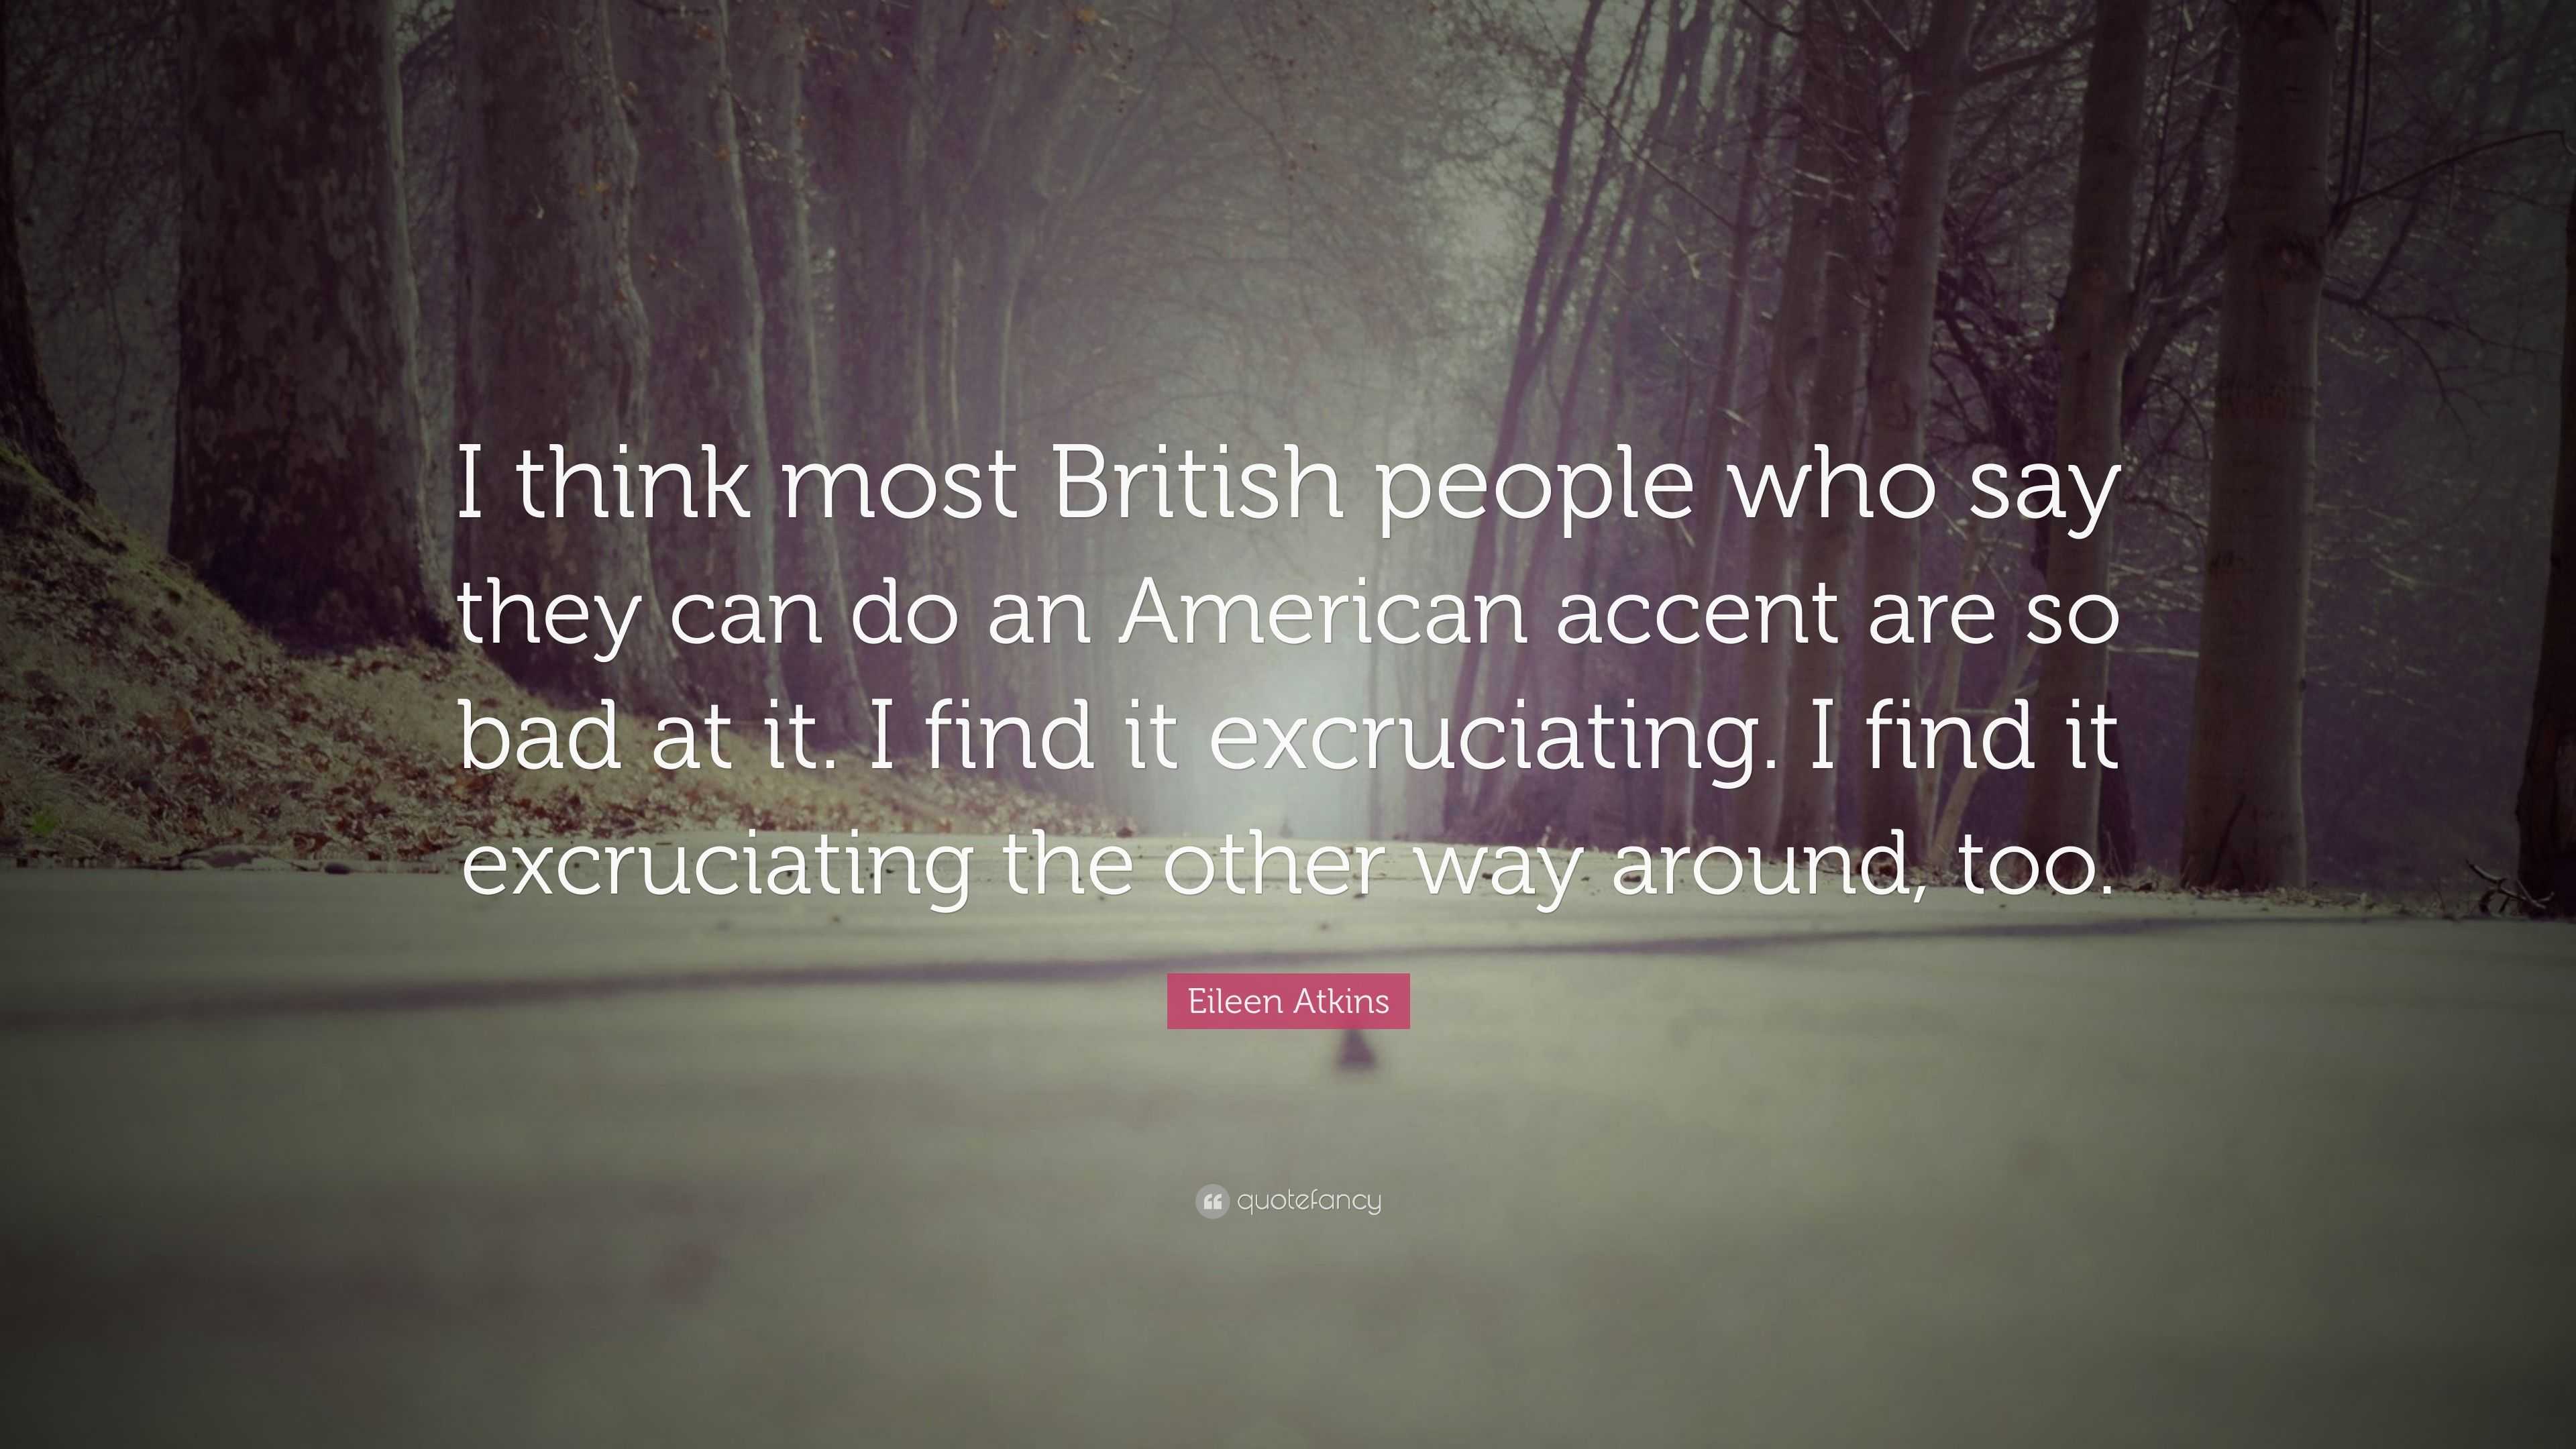 https://quotefancy.com/media/wallpaper/3840x2160/6054867-Eileen-Atkins-Quote-I-think-most-British-people-who-say-they-can.jpg